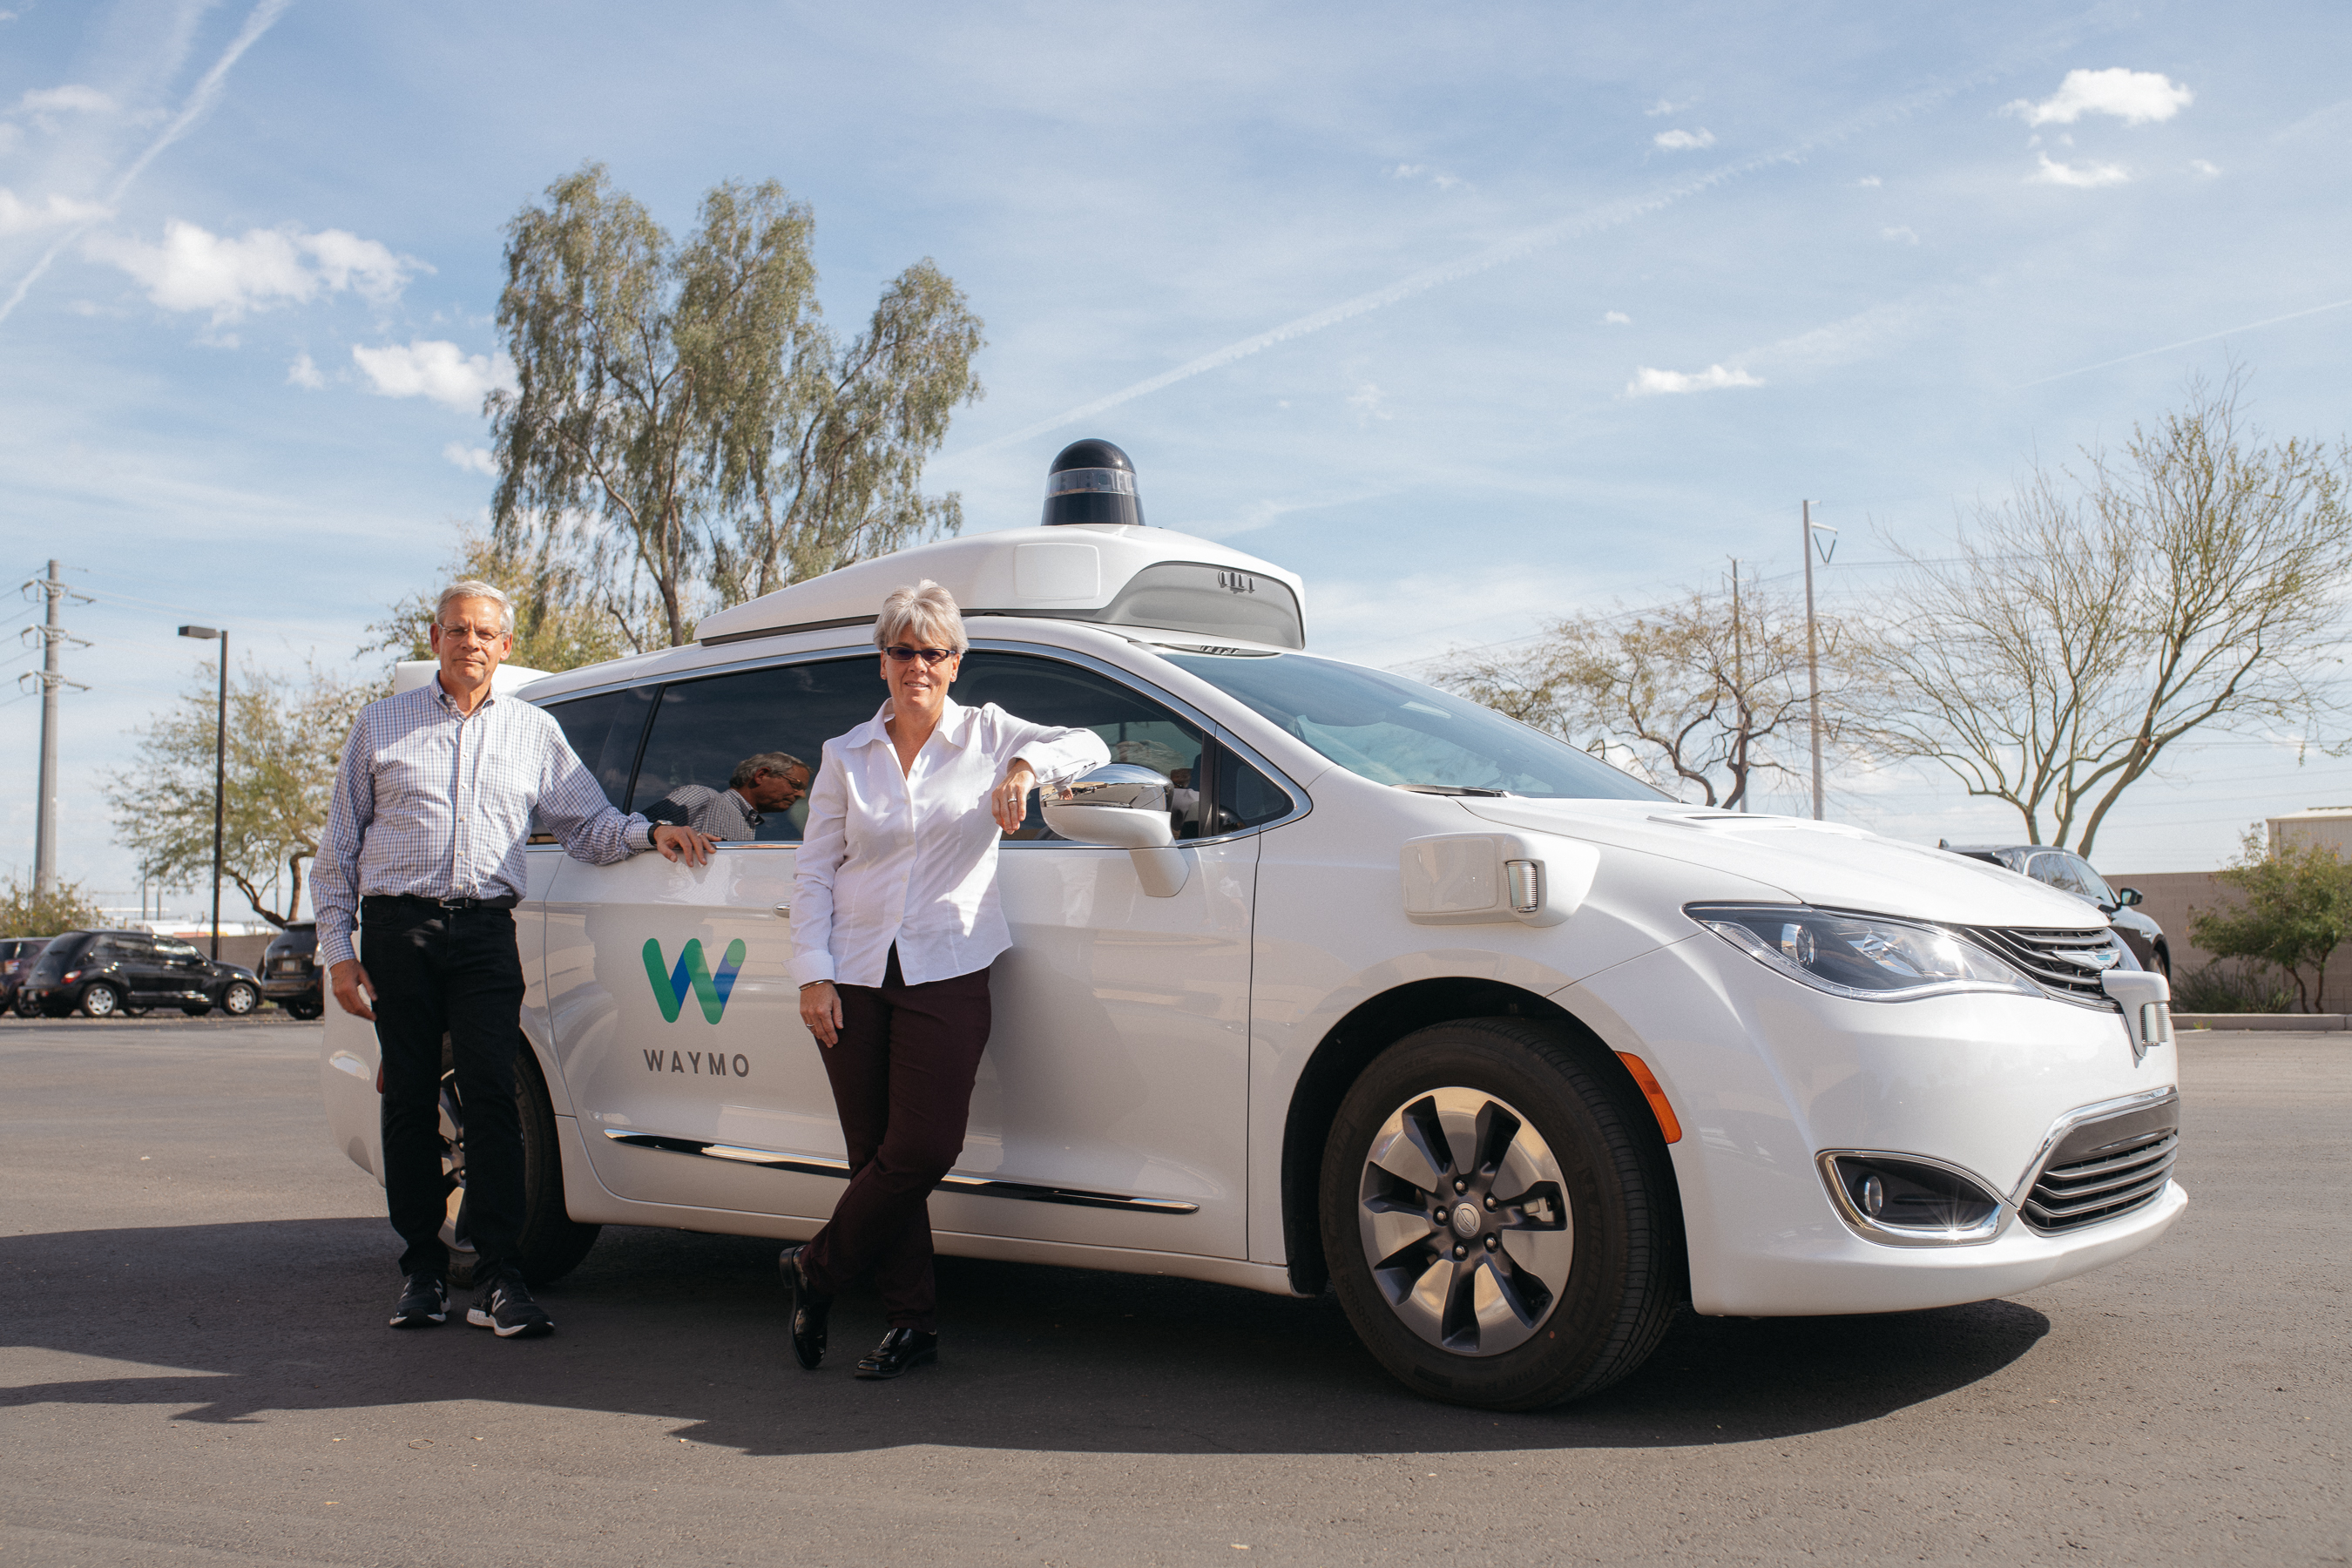 Alex and Kelly of the National Safety Council beside a Waymo vehicle